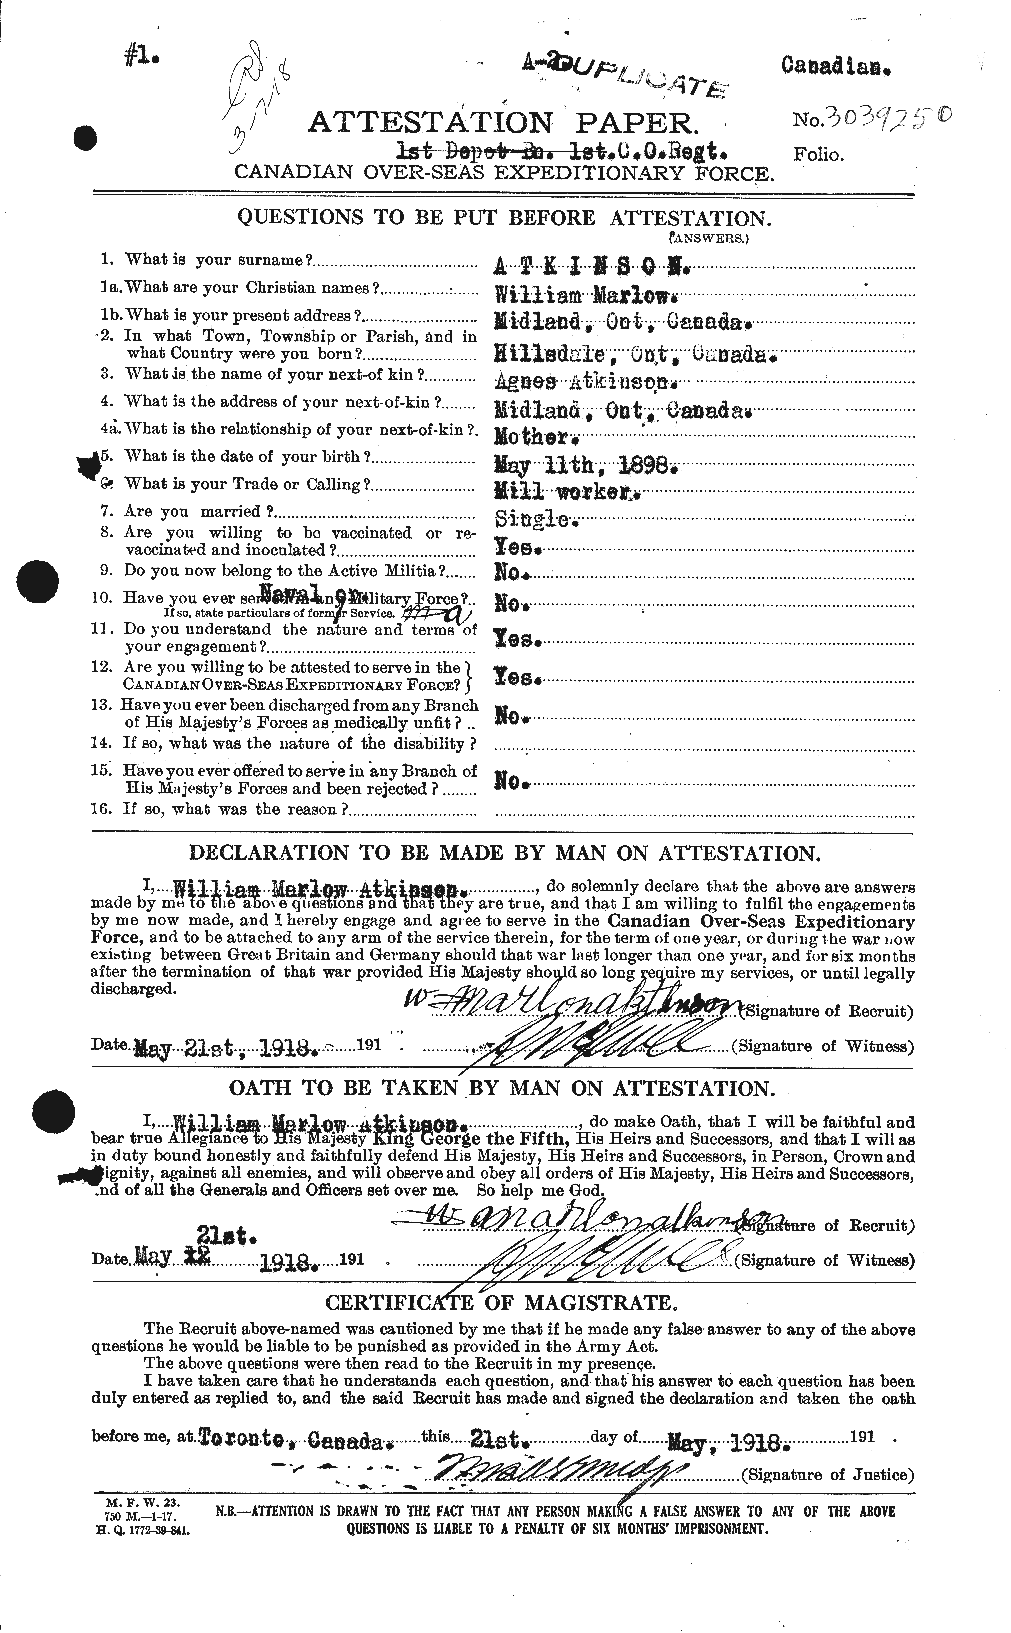 Personnel Records of the First World War - CEF 224172a